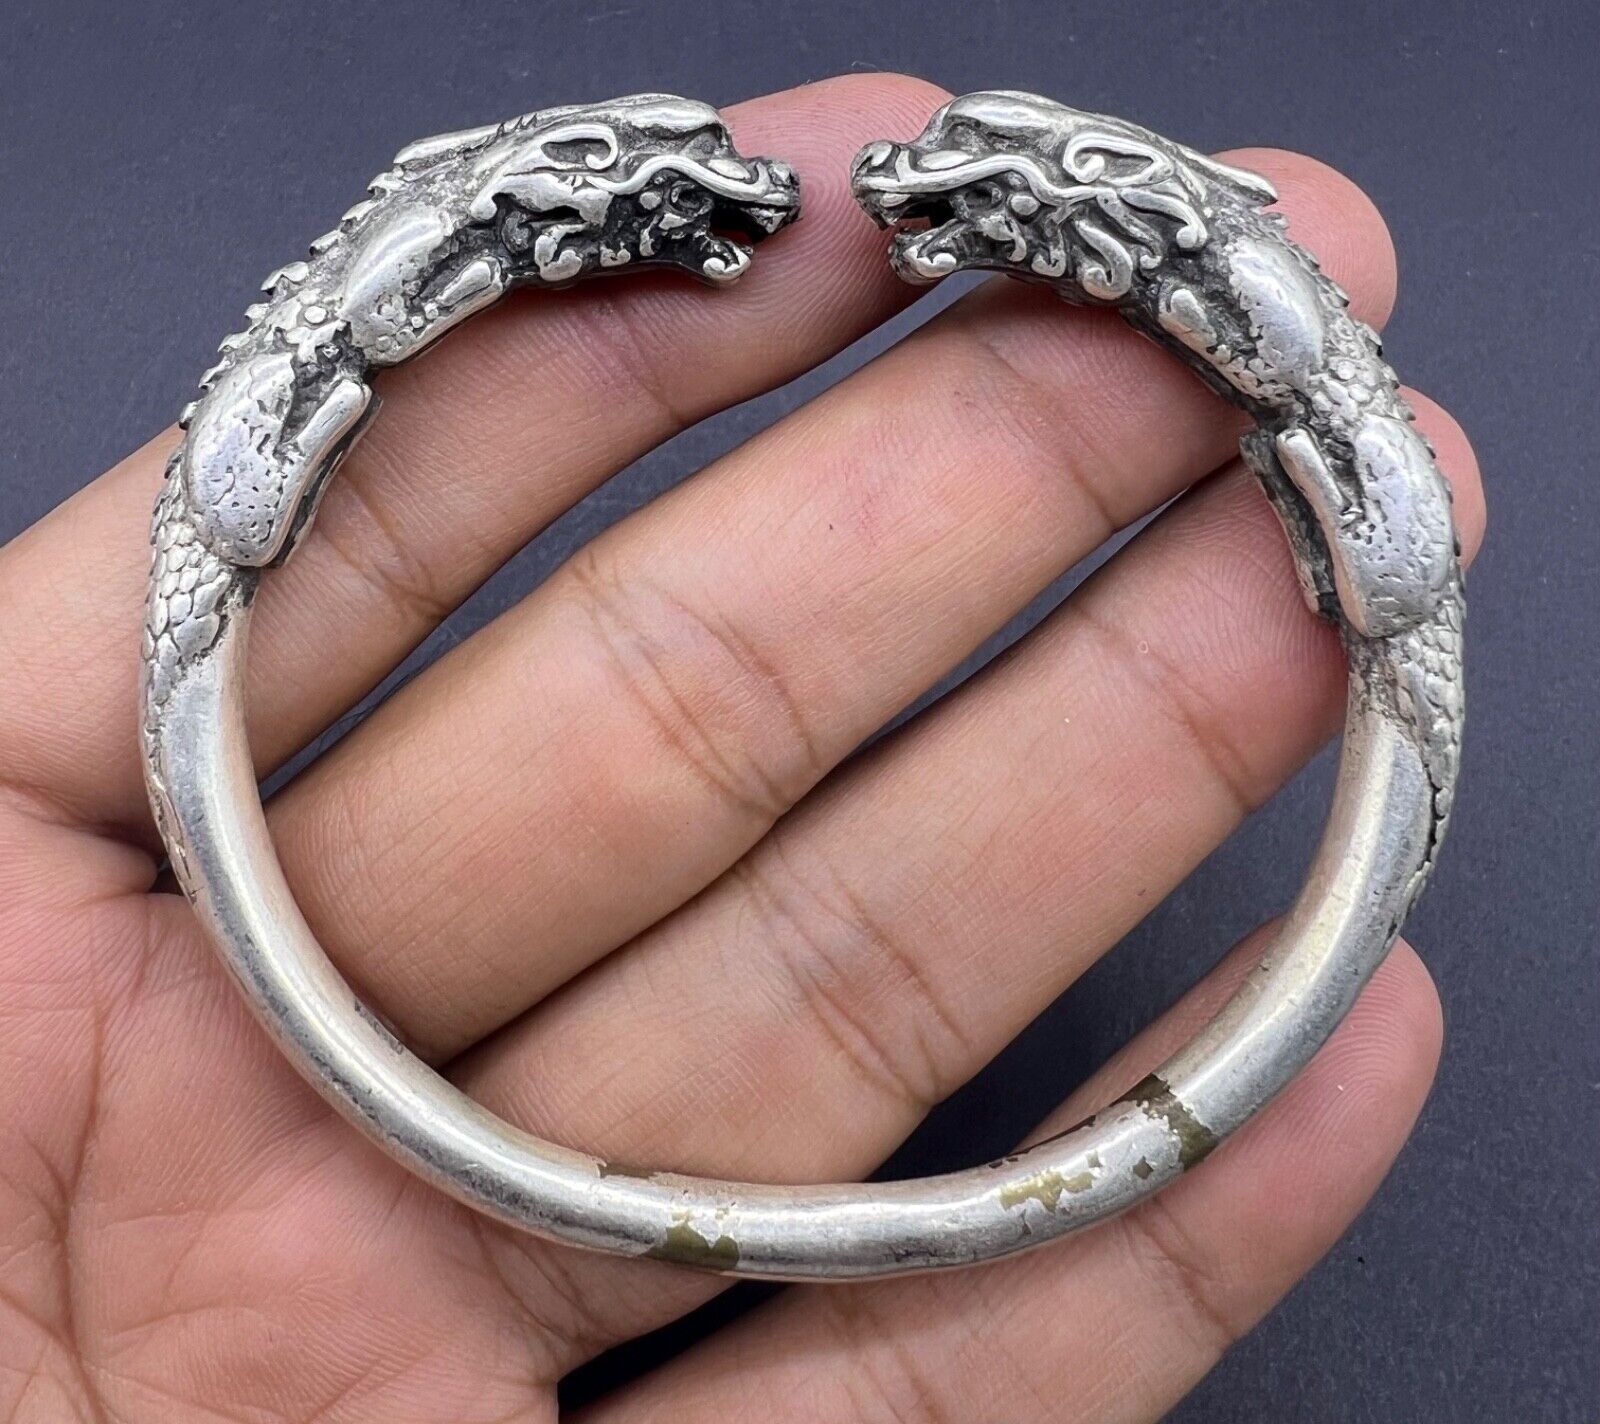 Rare Beautiful Old Viking Sliver Ancient Bangle With 2 Dragon Heads On Sides